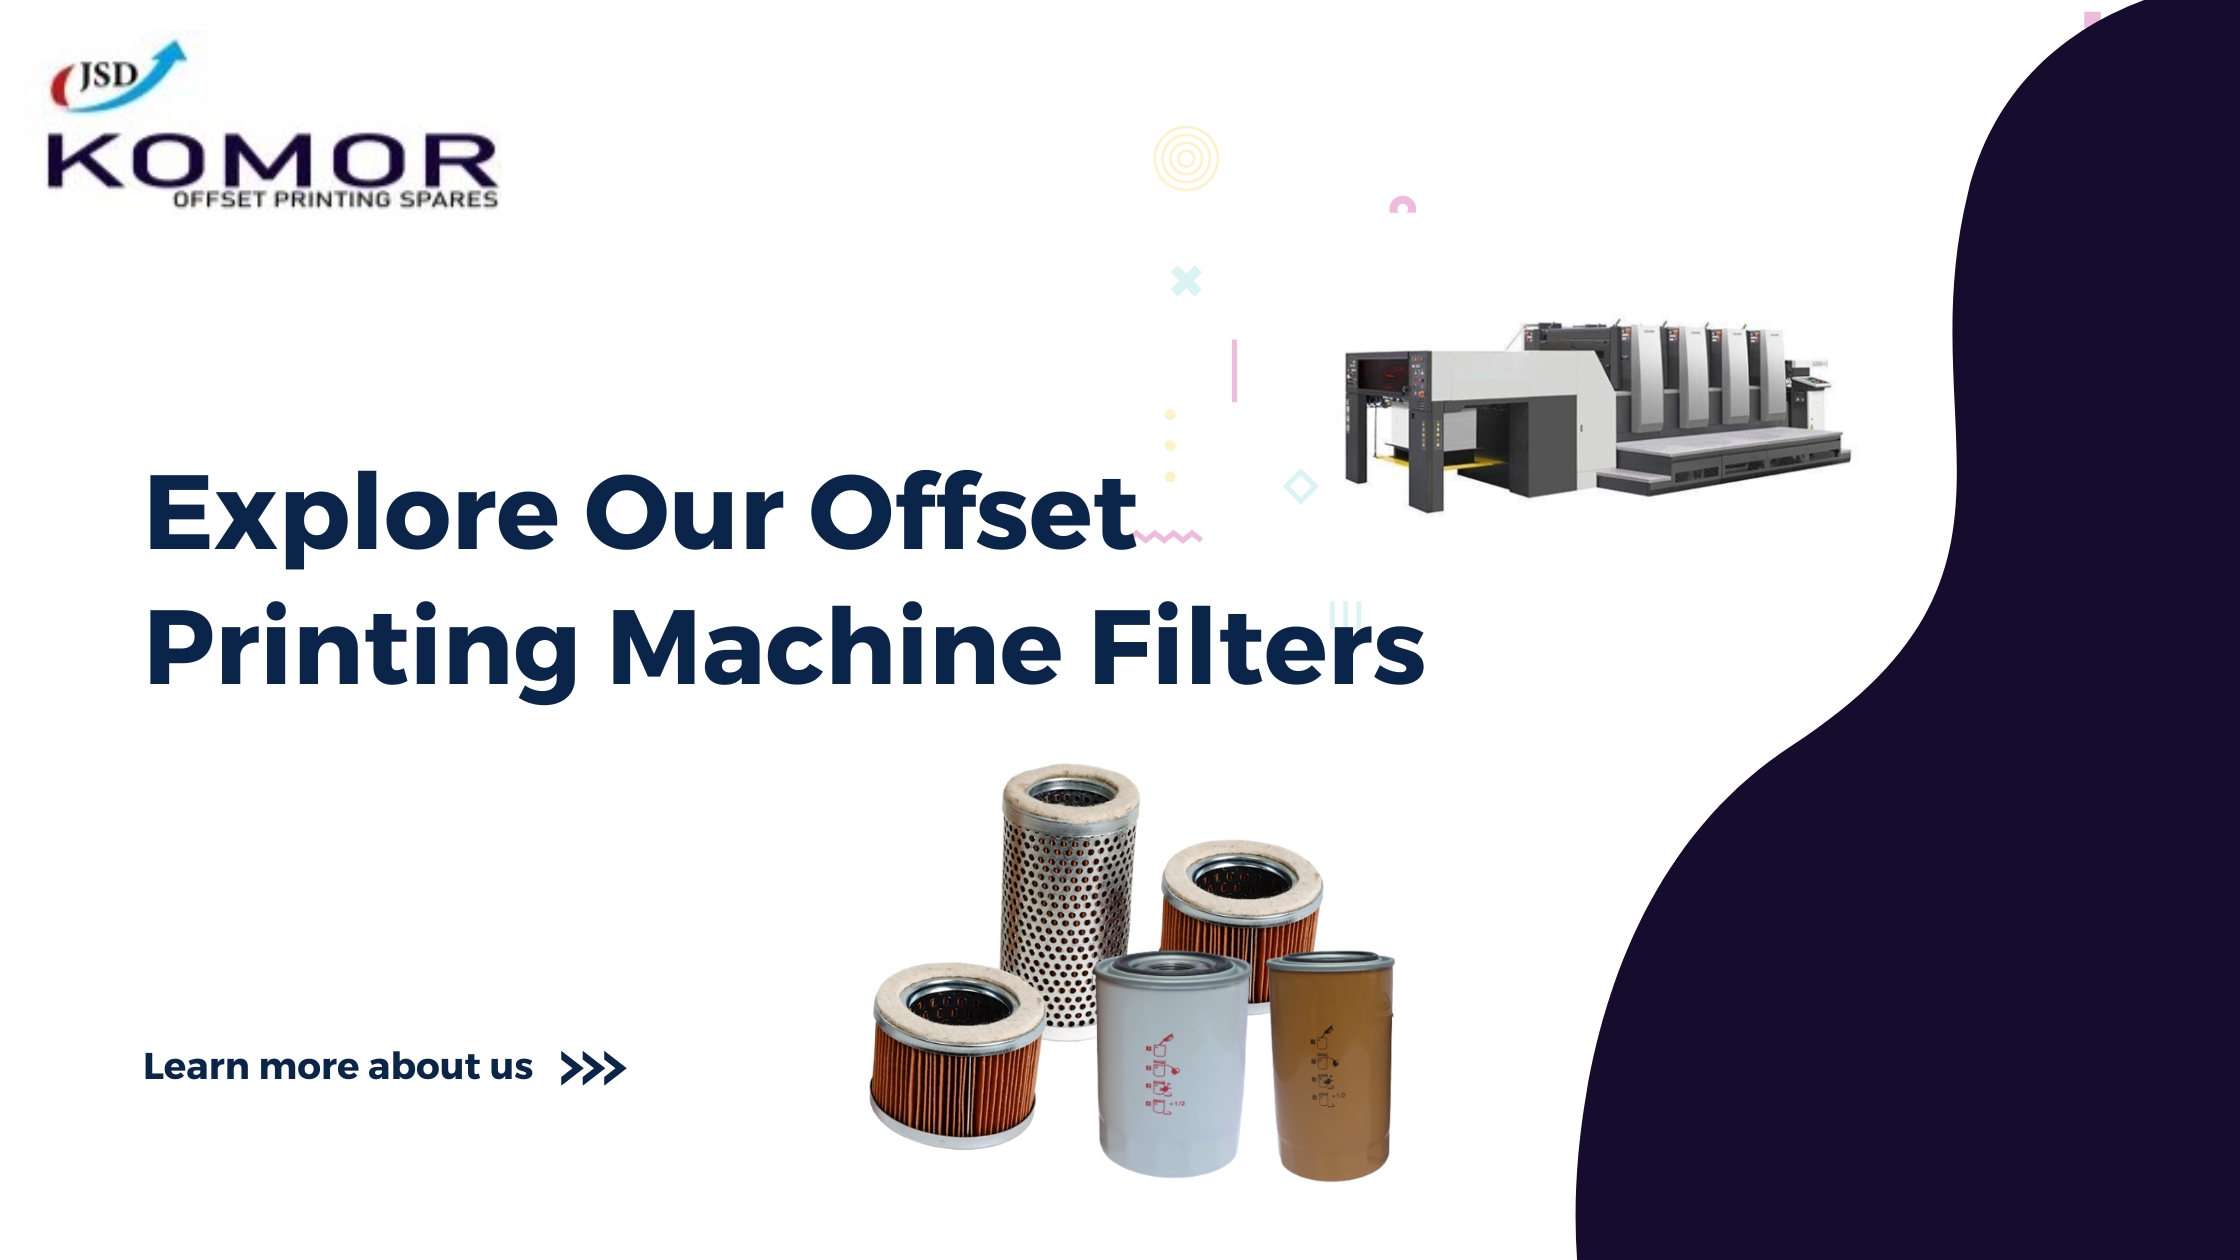 Purity in Every Print: Explore Our Offset Printing Machine Filters